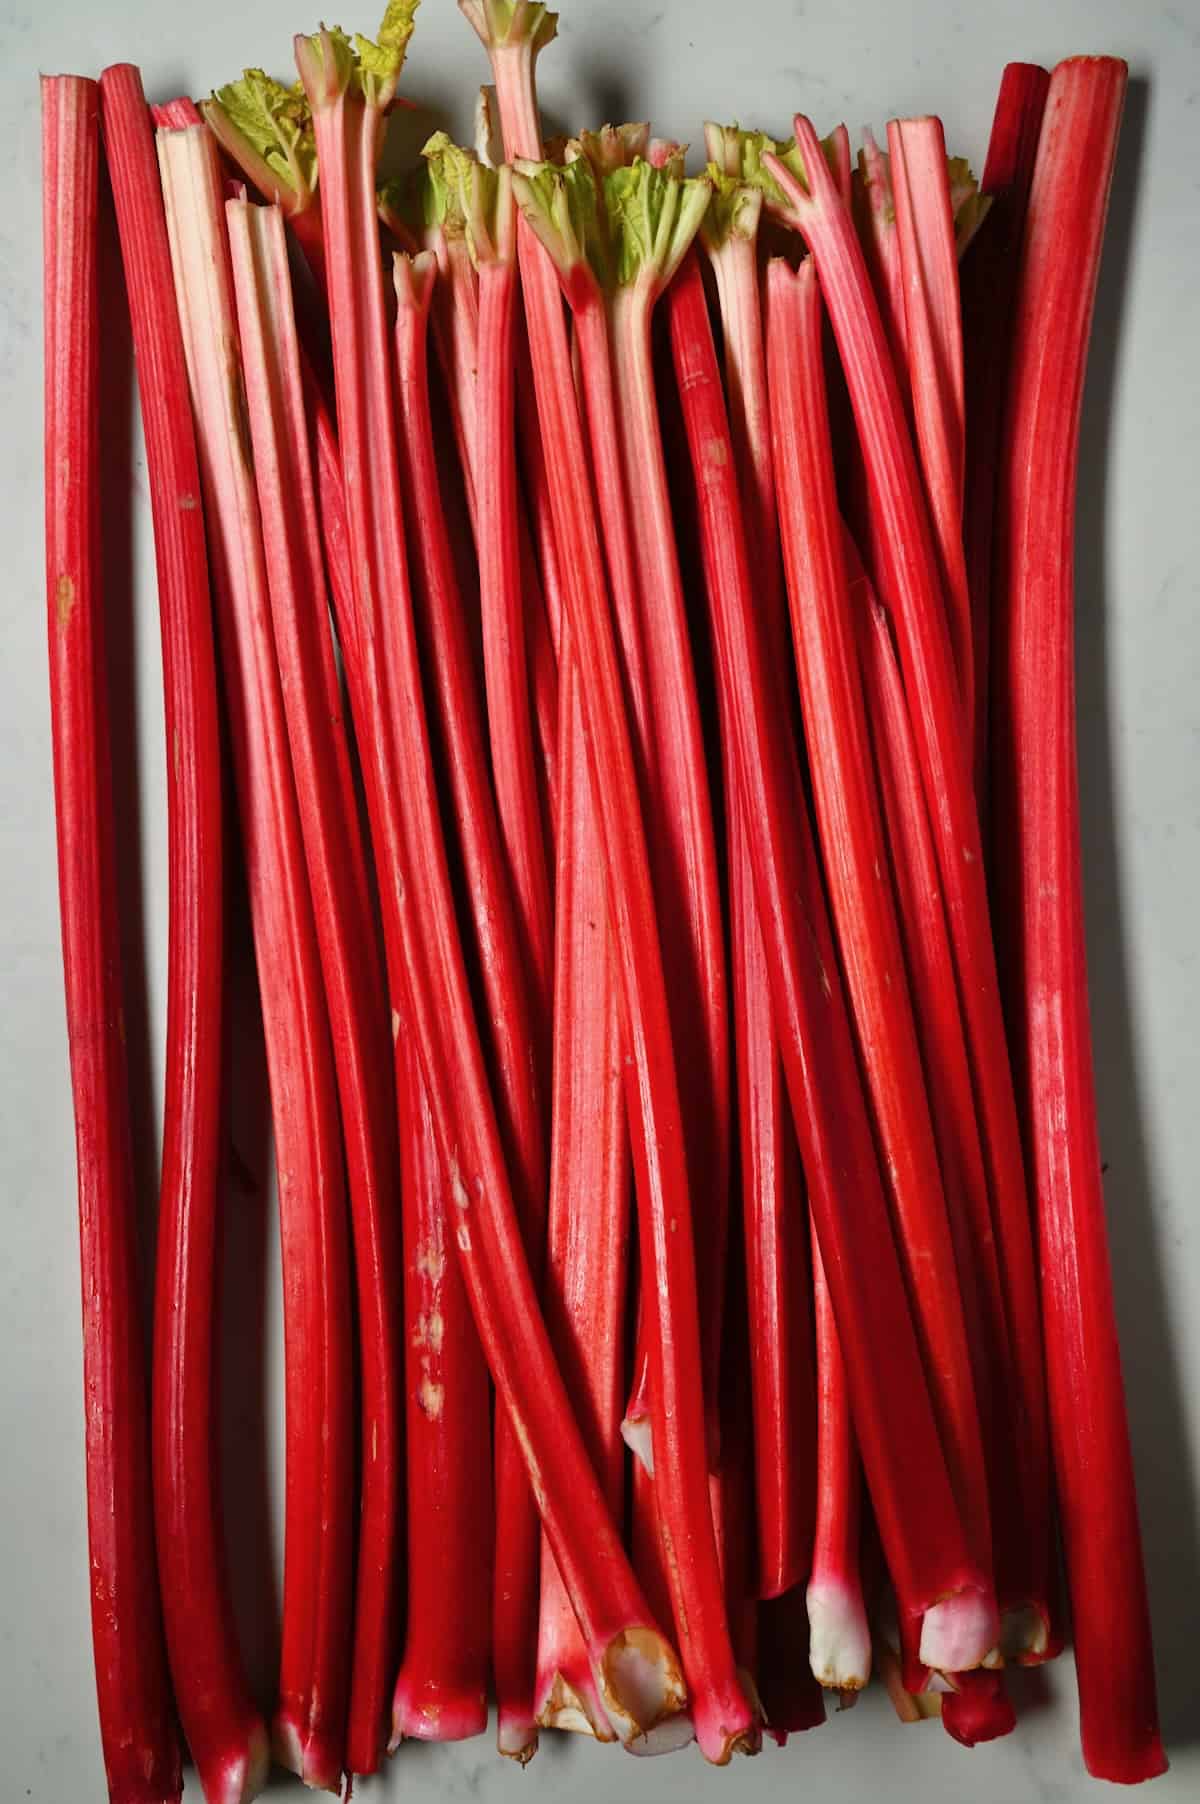 A bunch of rhubarb stalks on a flat surface